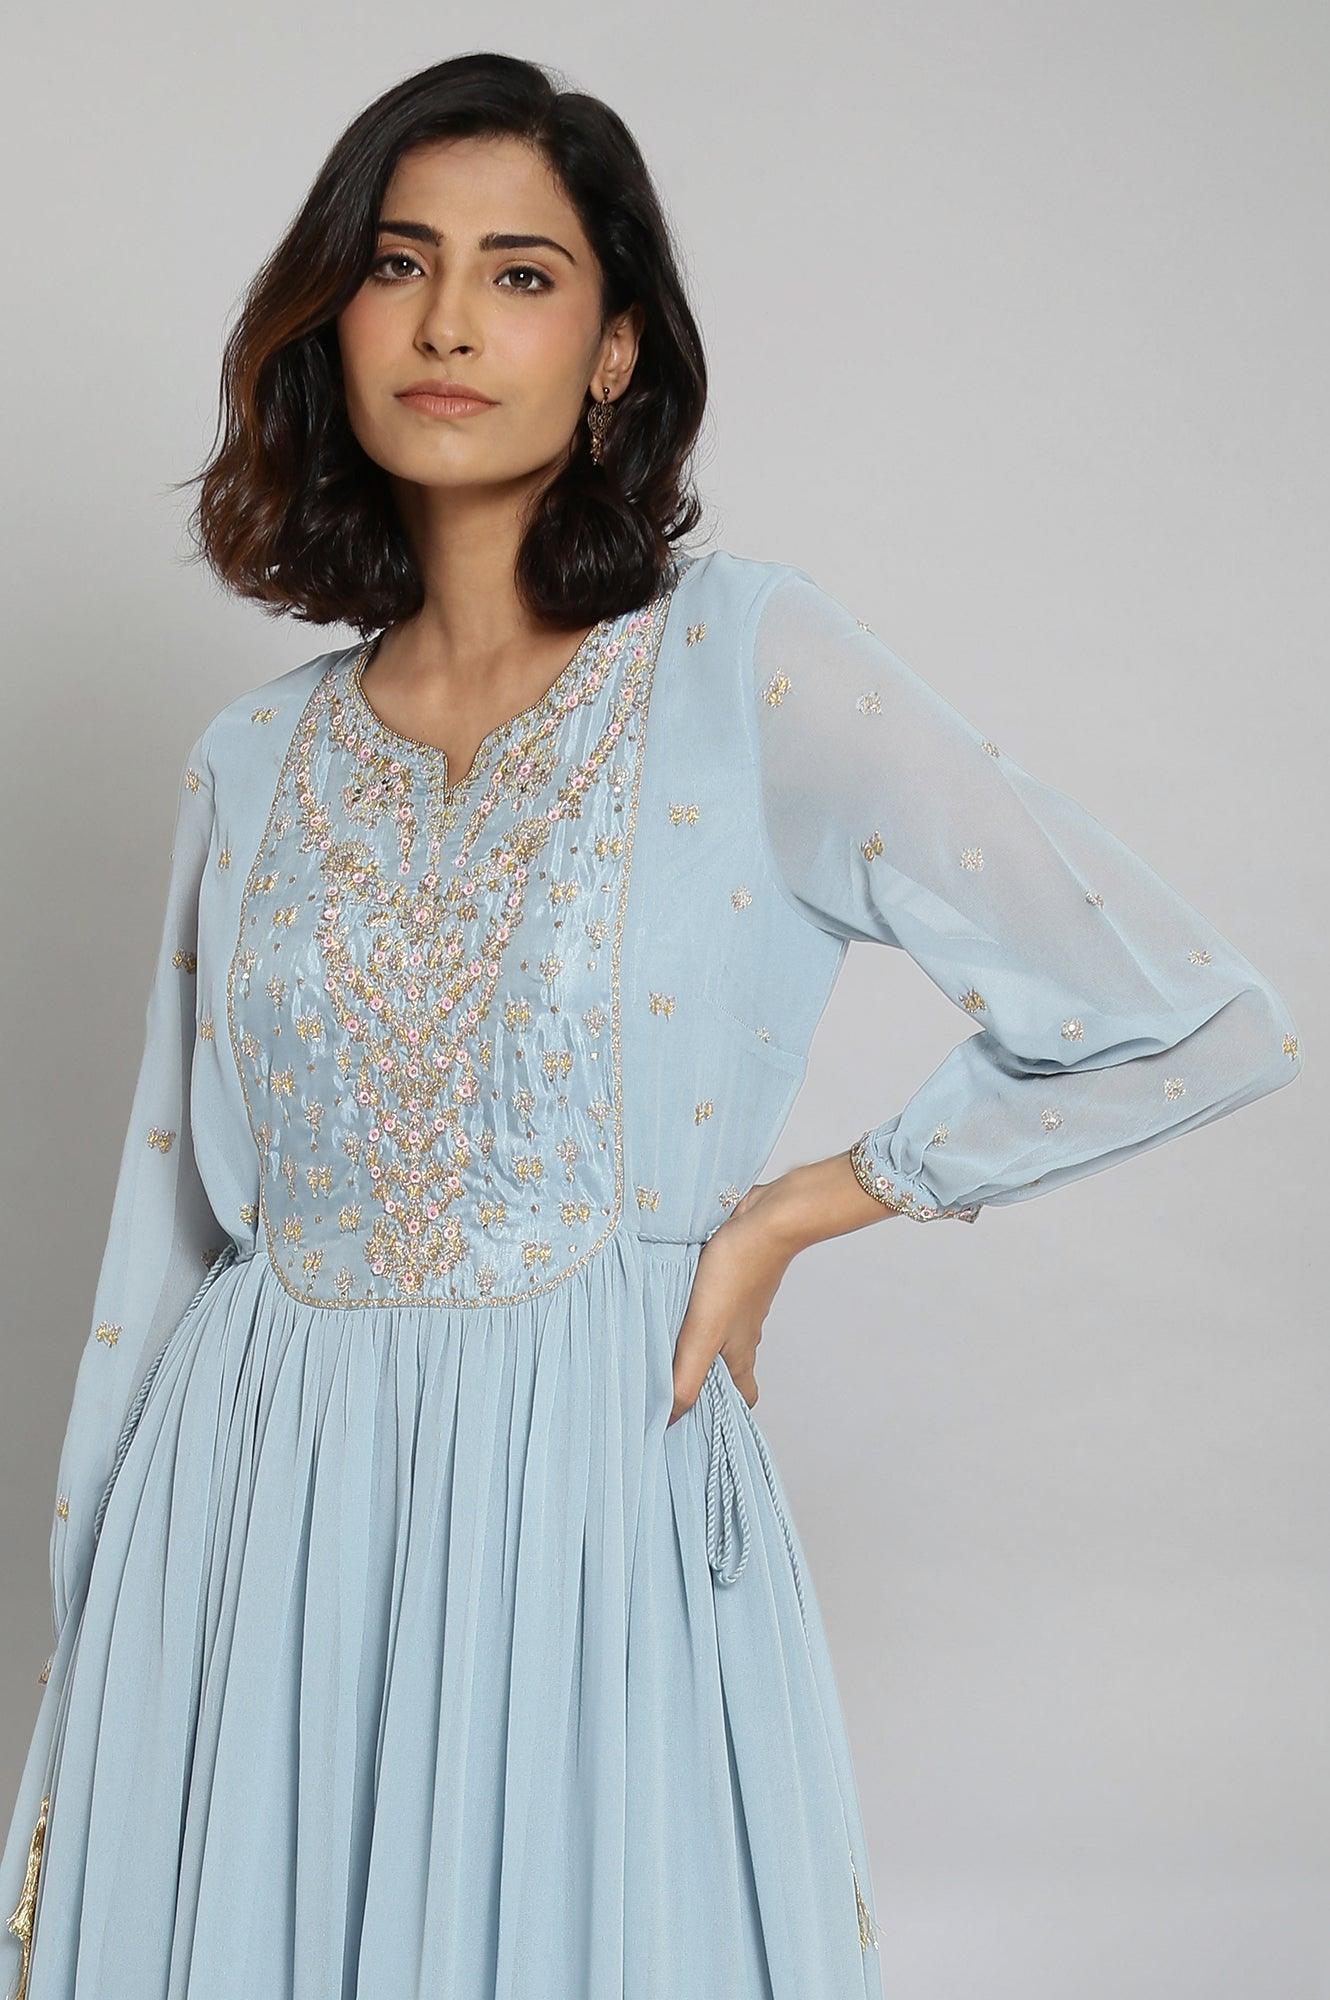 Light Blue Embroidered Gathered Victorian Dress - wforwoman